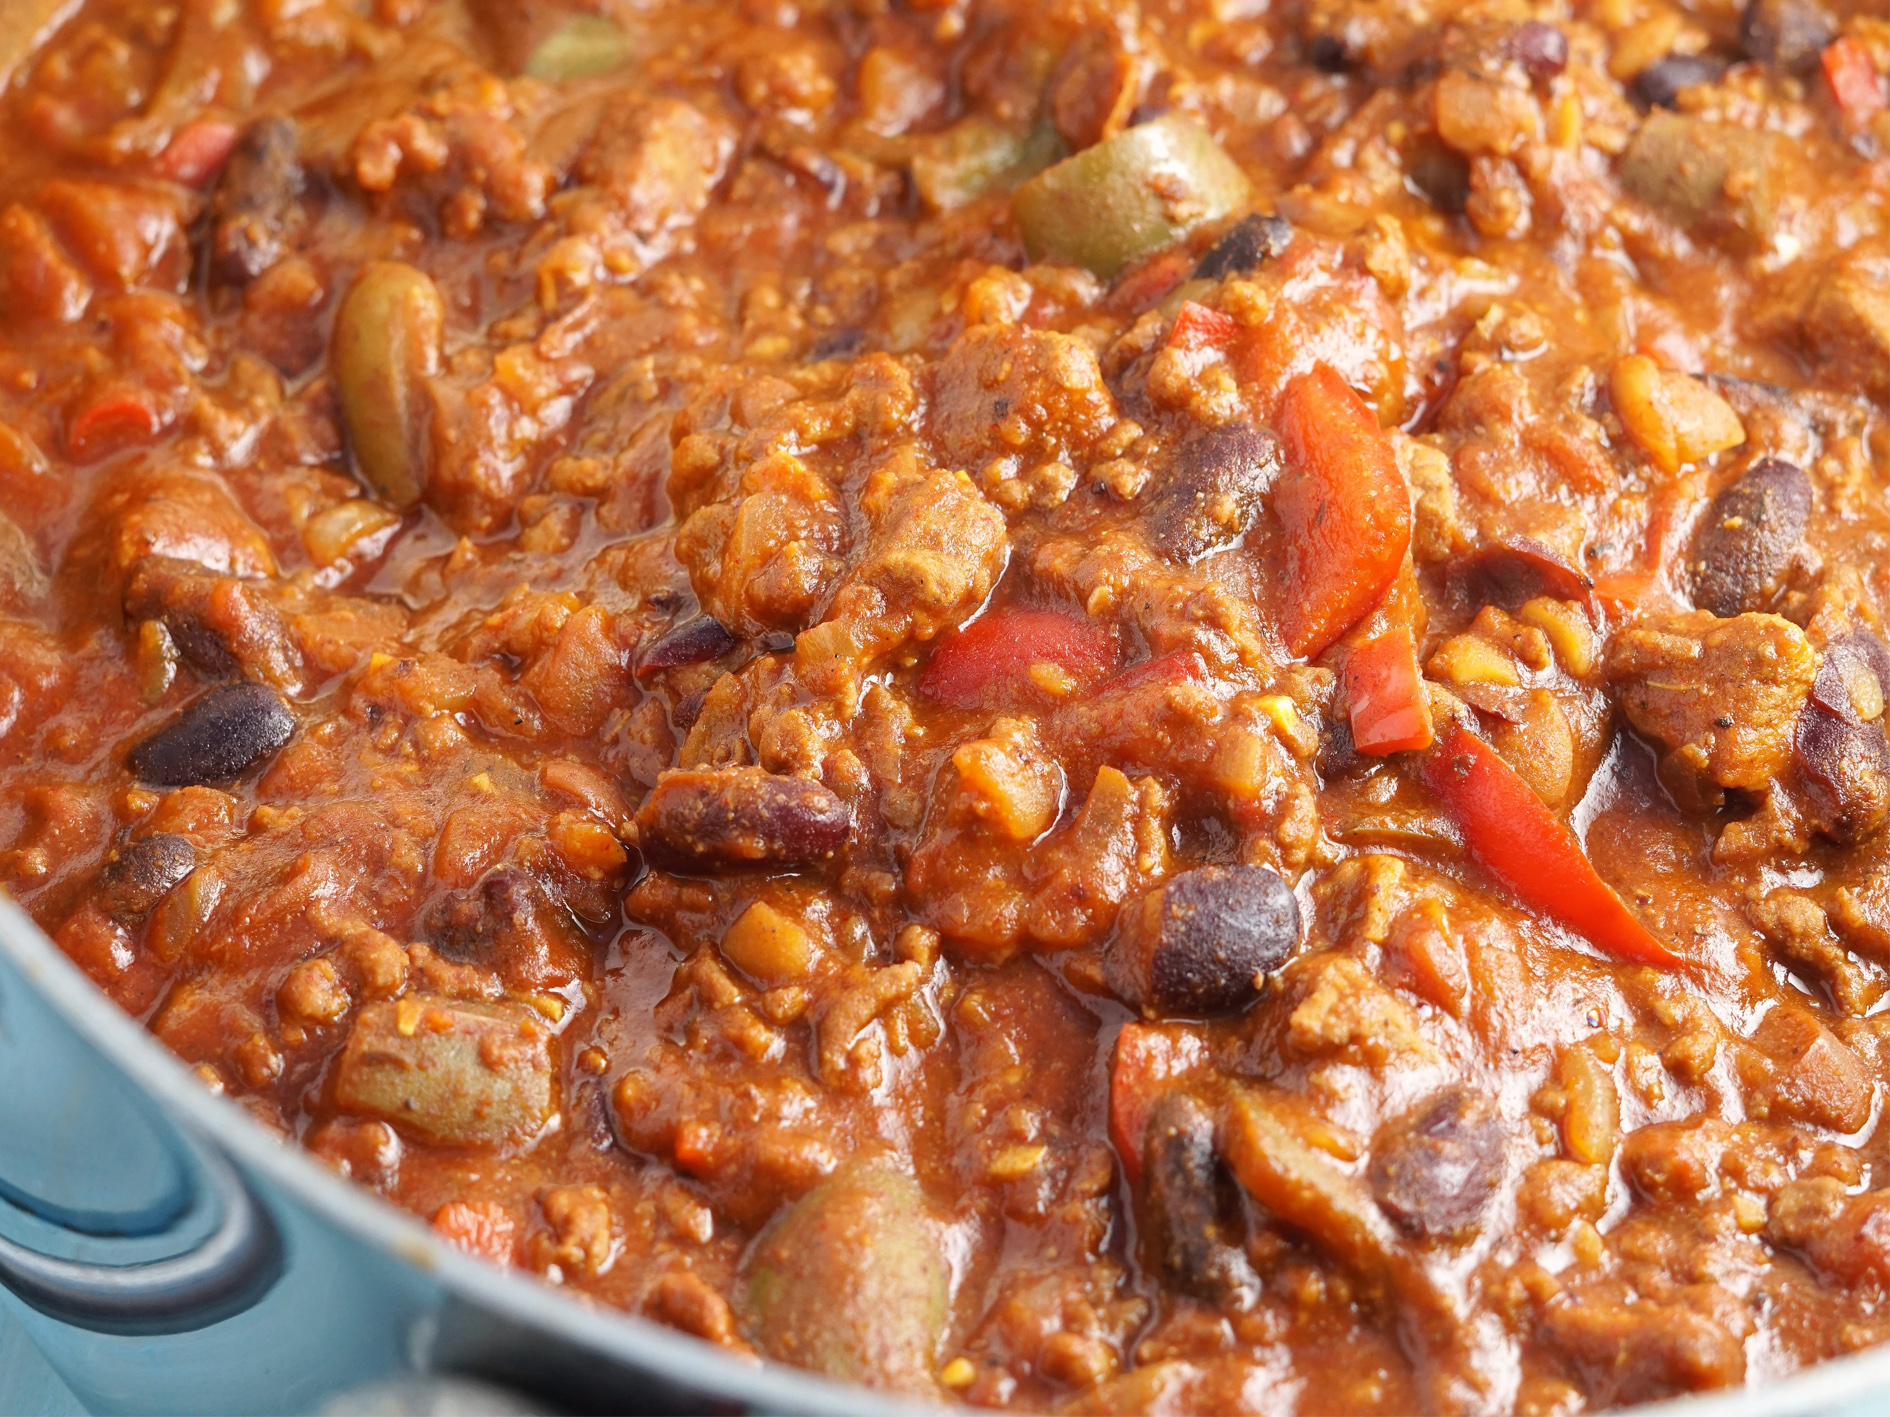 Johnny Cash Chili Recipe: Spicy, Savory, and Irresistible!